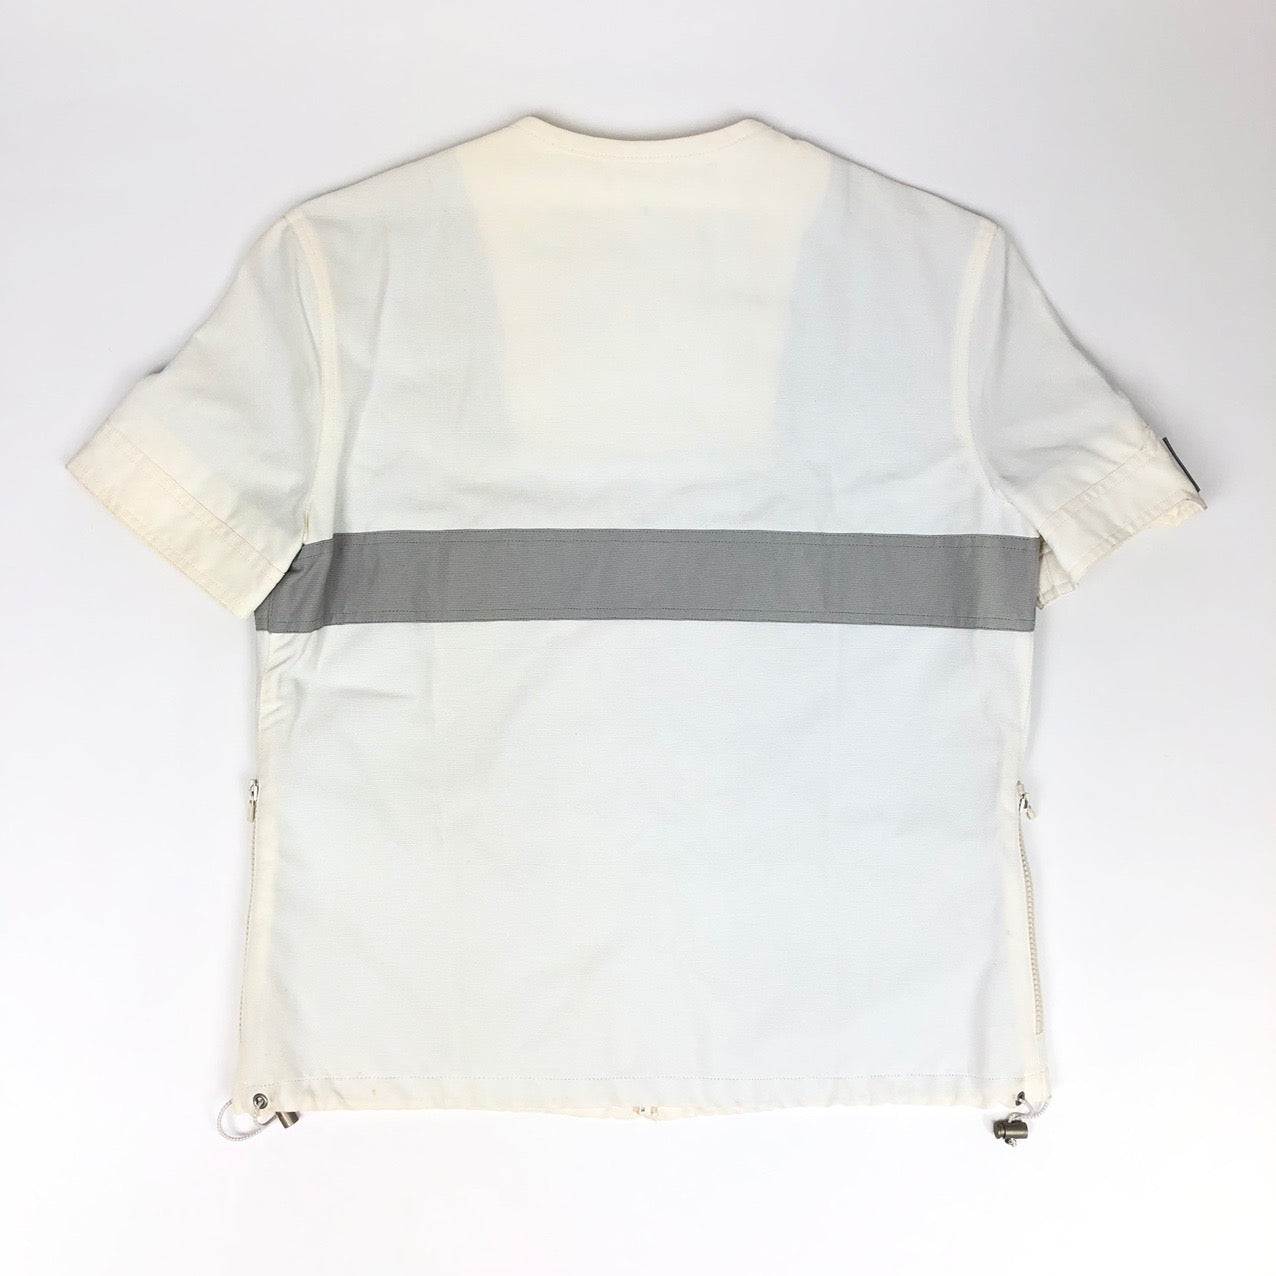 Chanel Identification Shirt from 2001